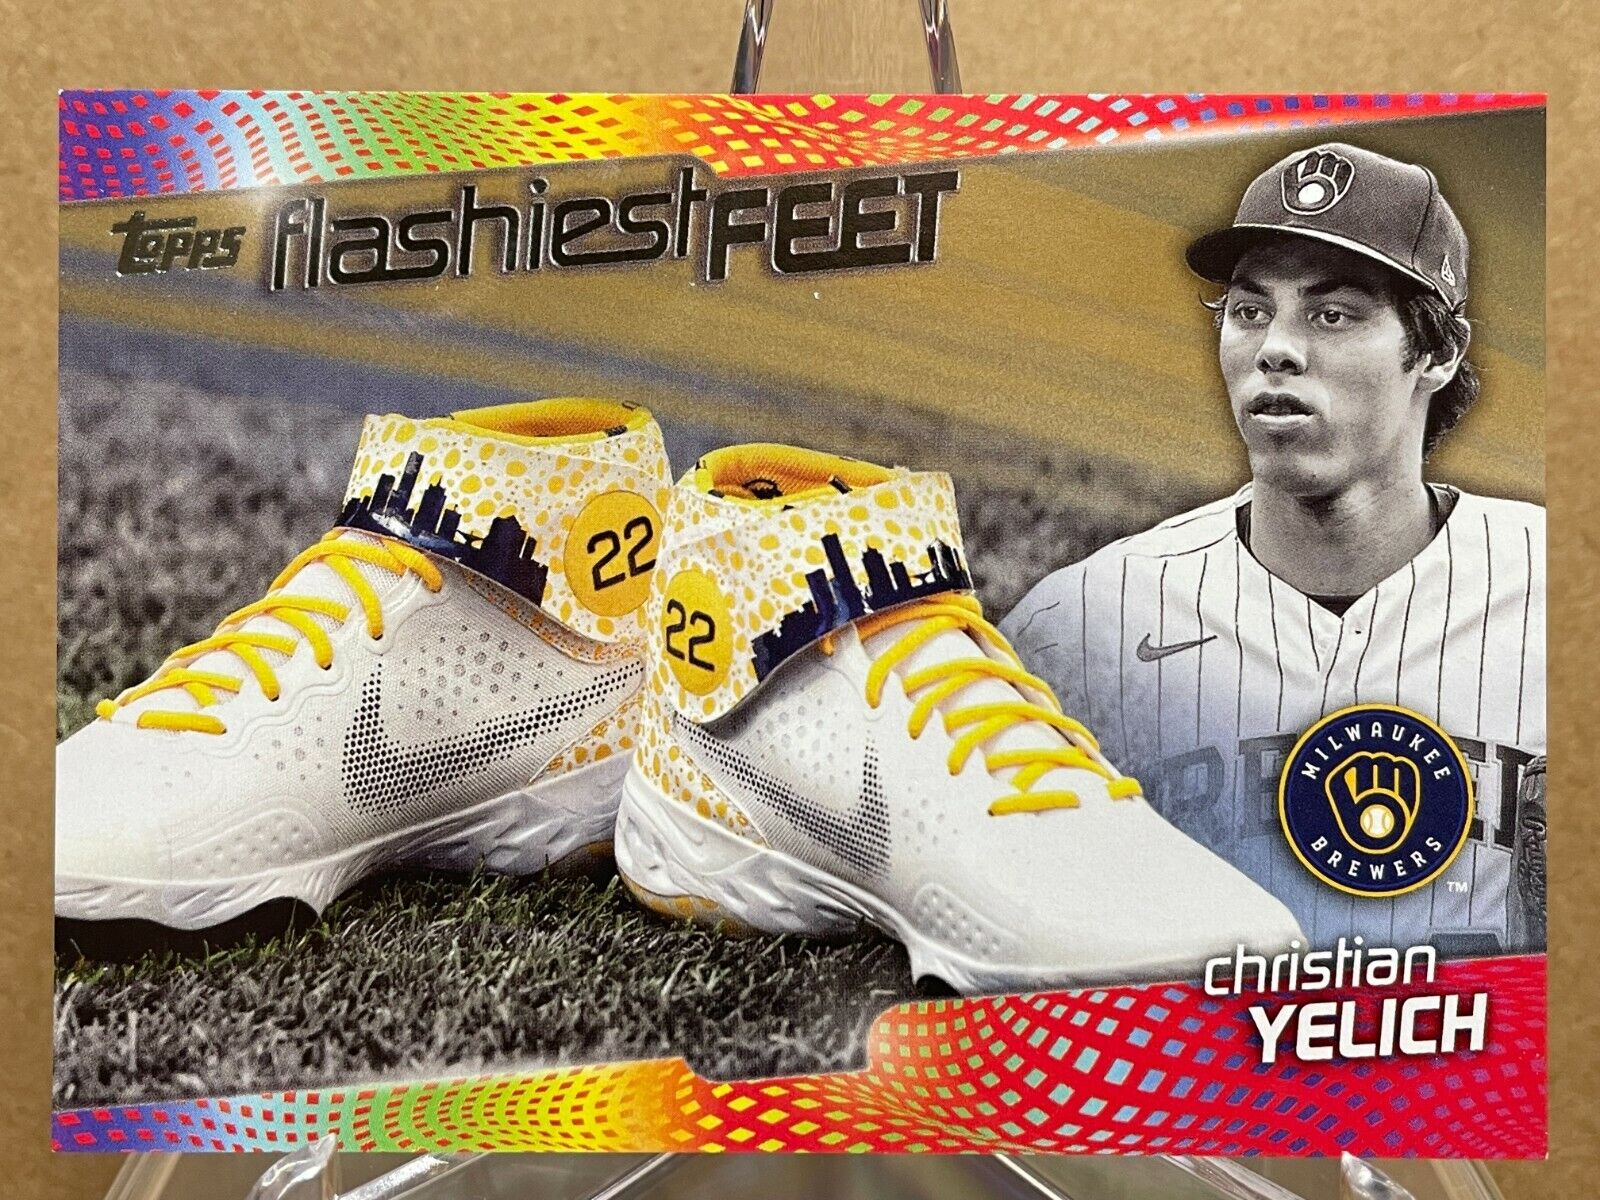  2022 Topps Series 1 - Christian Yelich - Flashiest Feet - Gold /75